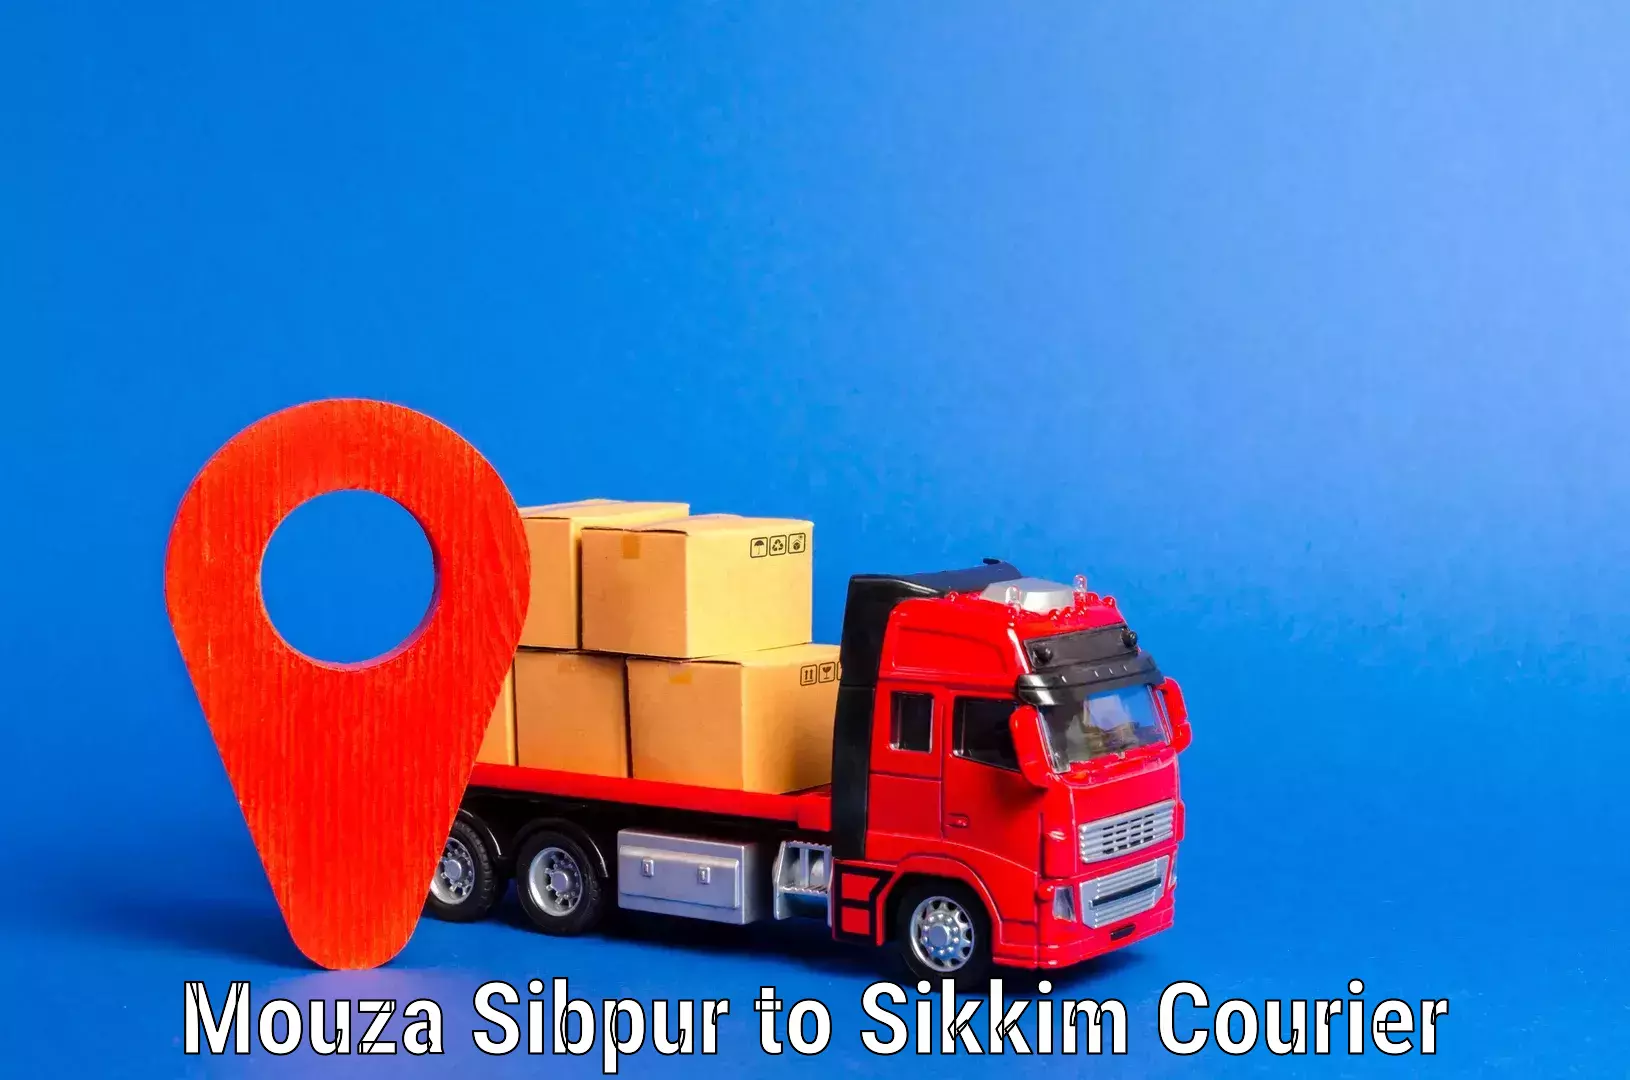 Furniture relocation experts Mouza Sibpur to Sikkim